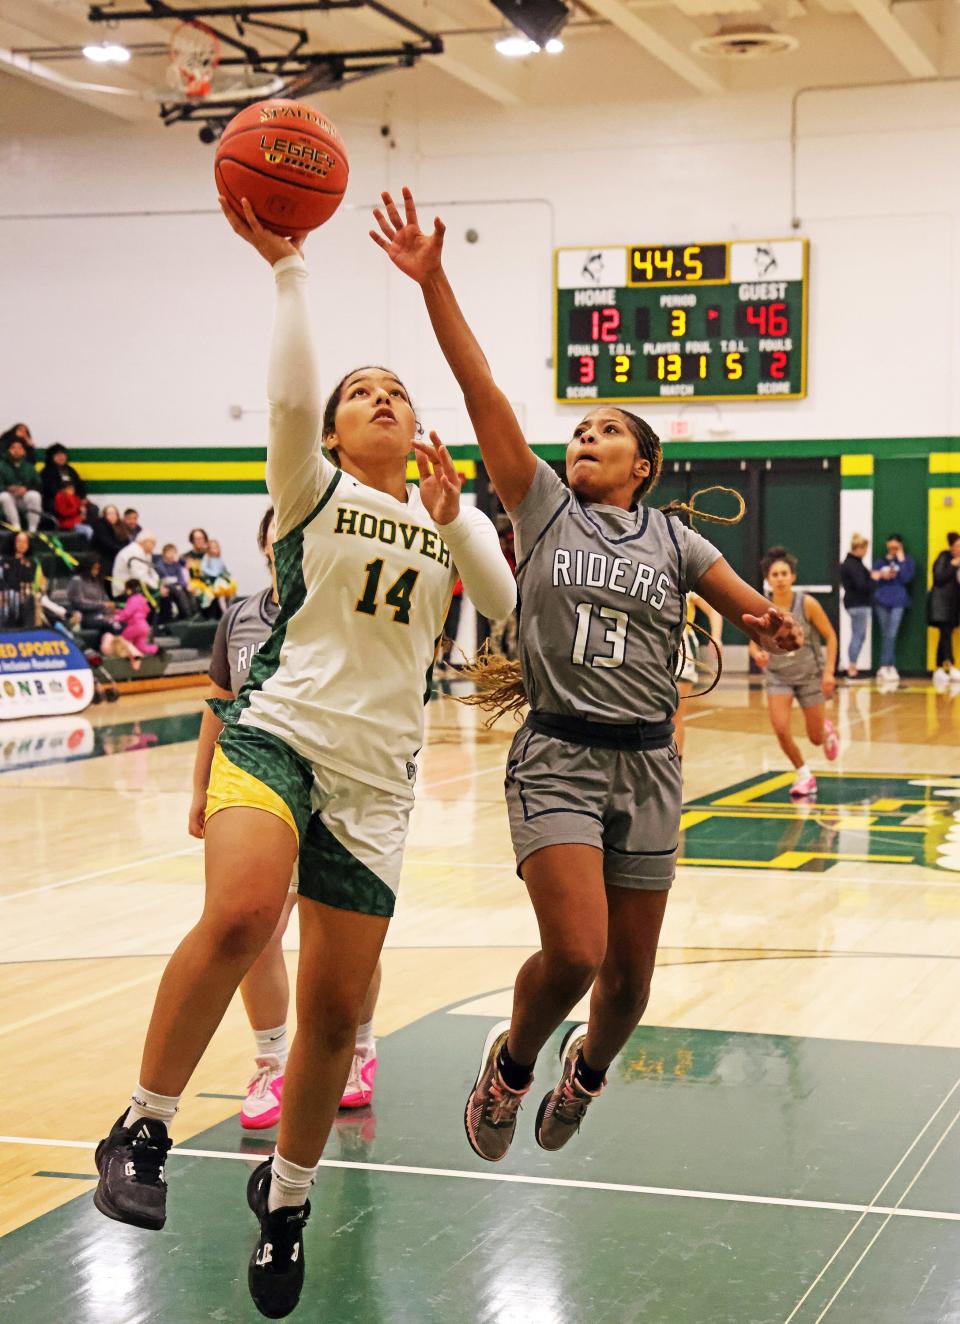 Hoover senior guard Alayna Jarrett (14) drives past Roosevelt sophomore Keonni Langford (13). Hoover fell to 0-10 on the season after Friday's loss.